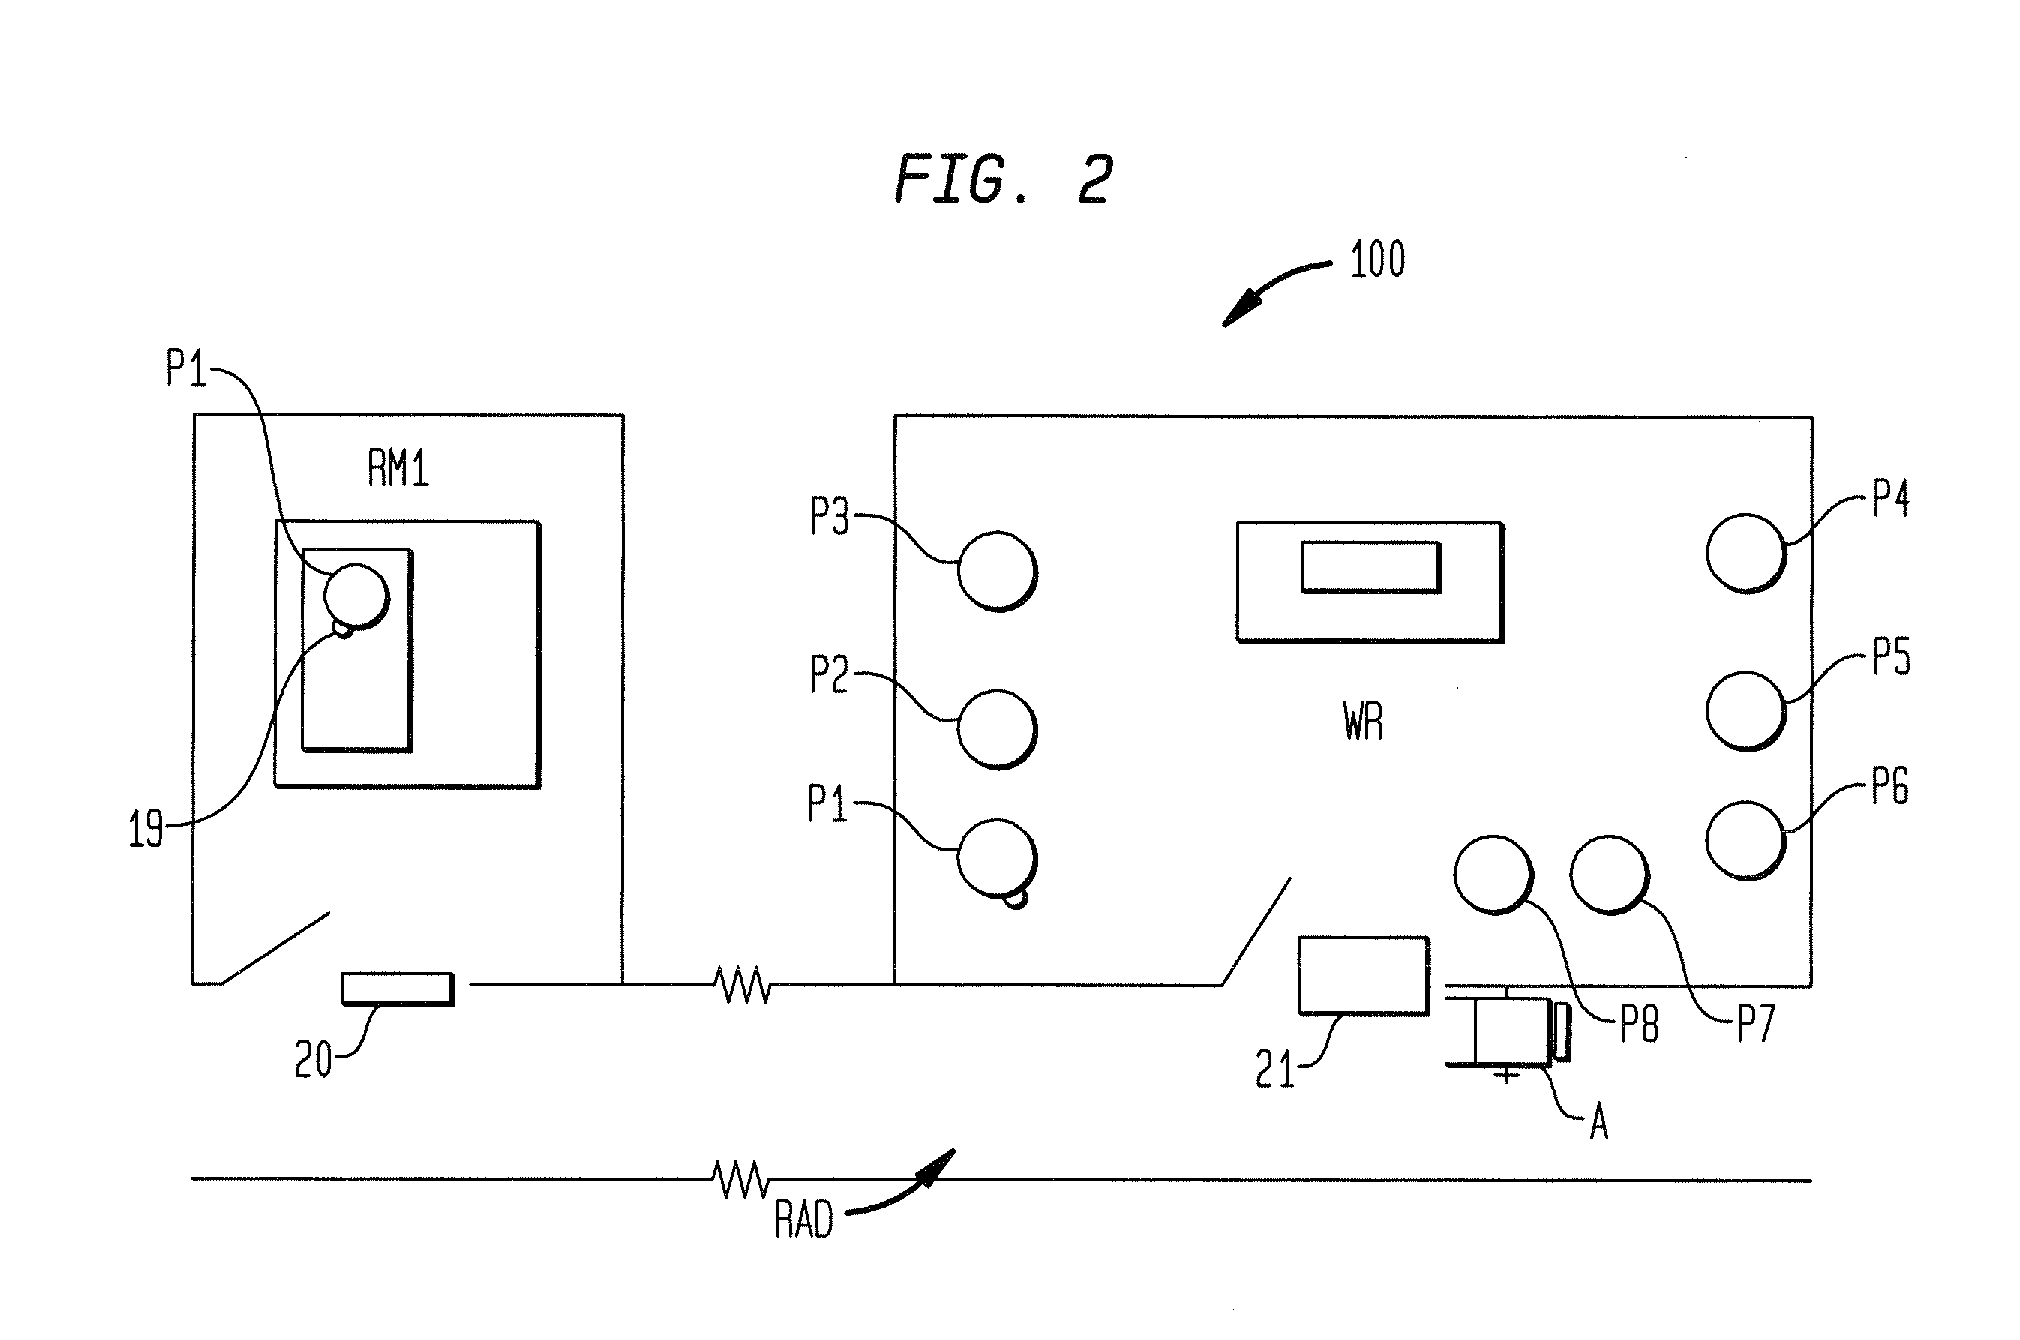 Method And Apparatus For Managing And Locating Hospital Assets, Patients And Personnel